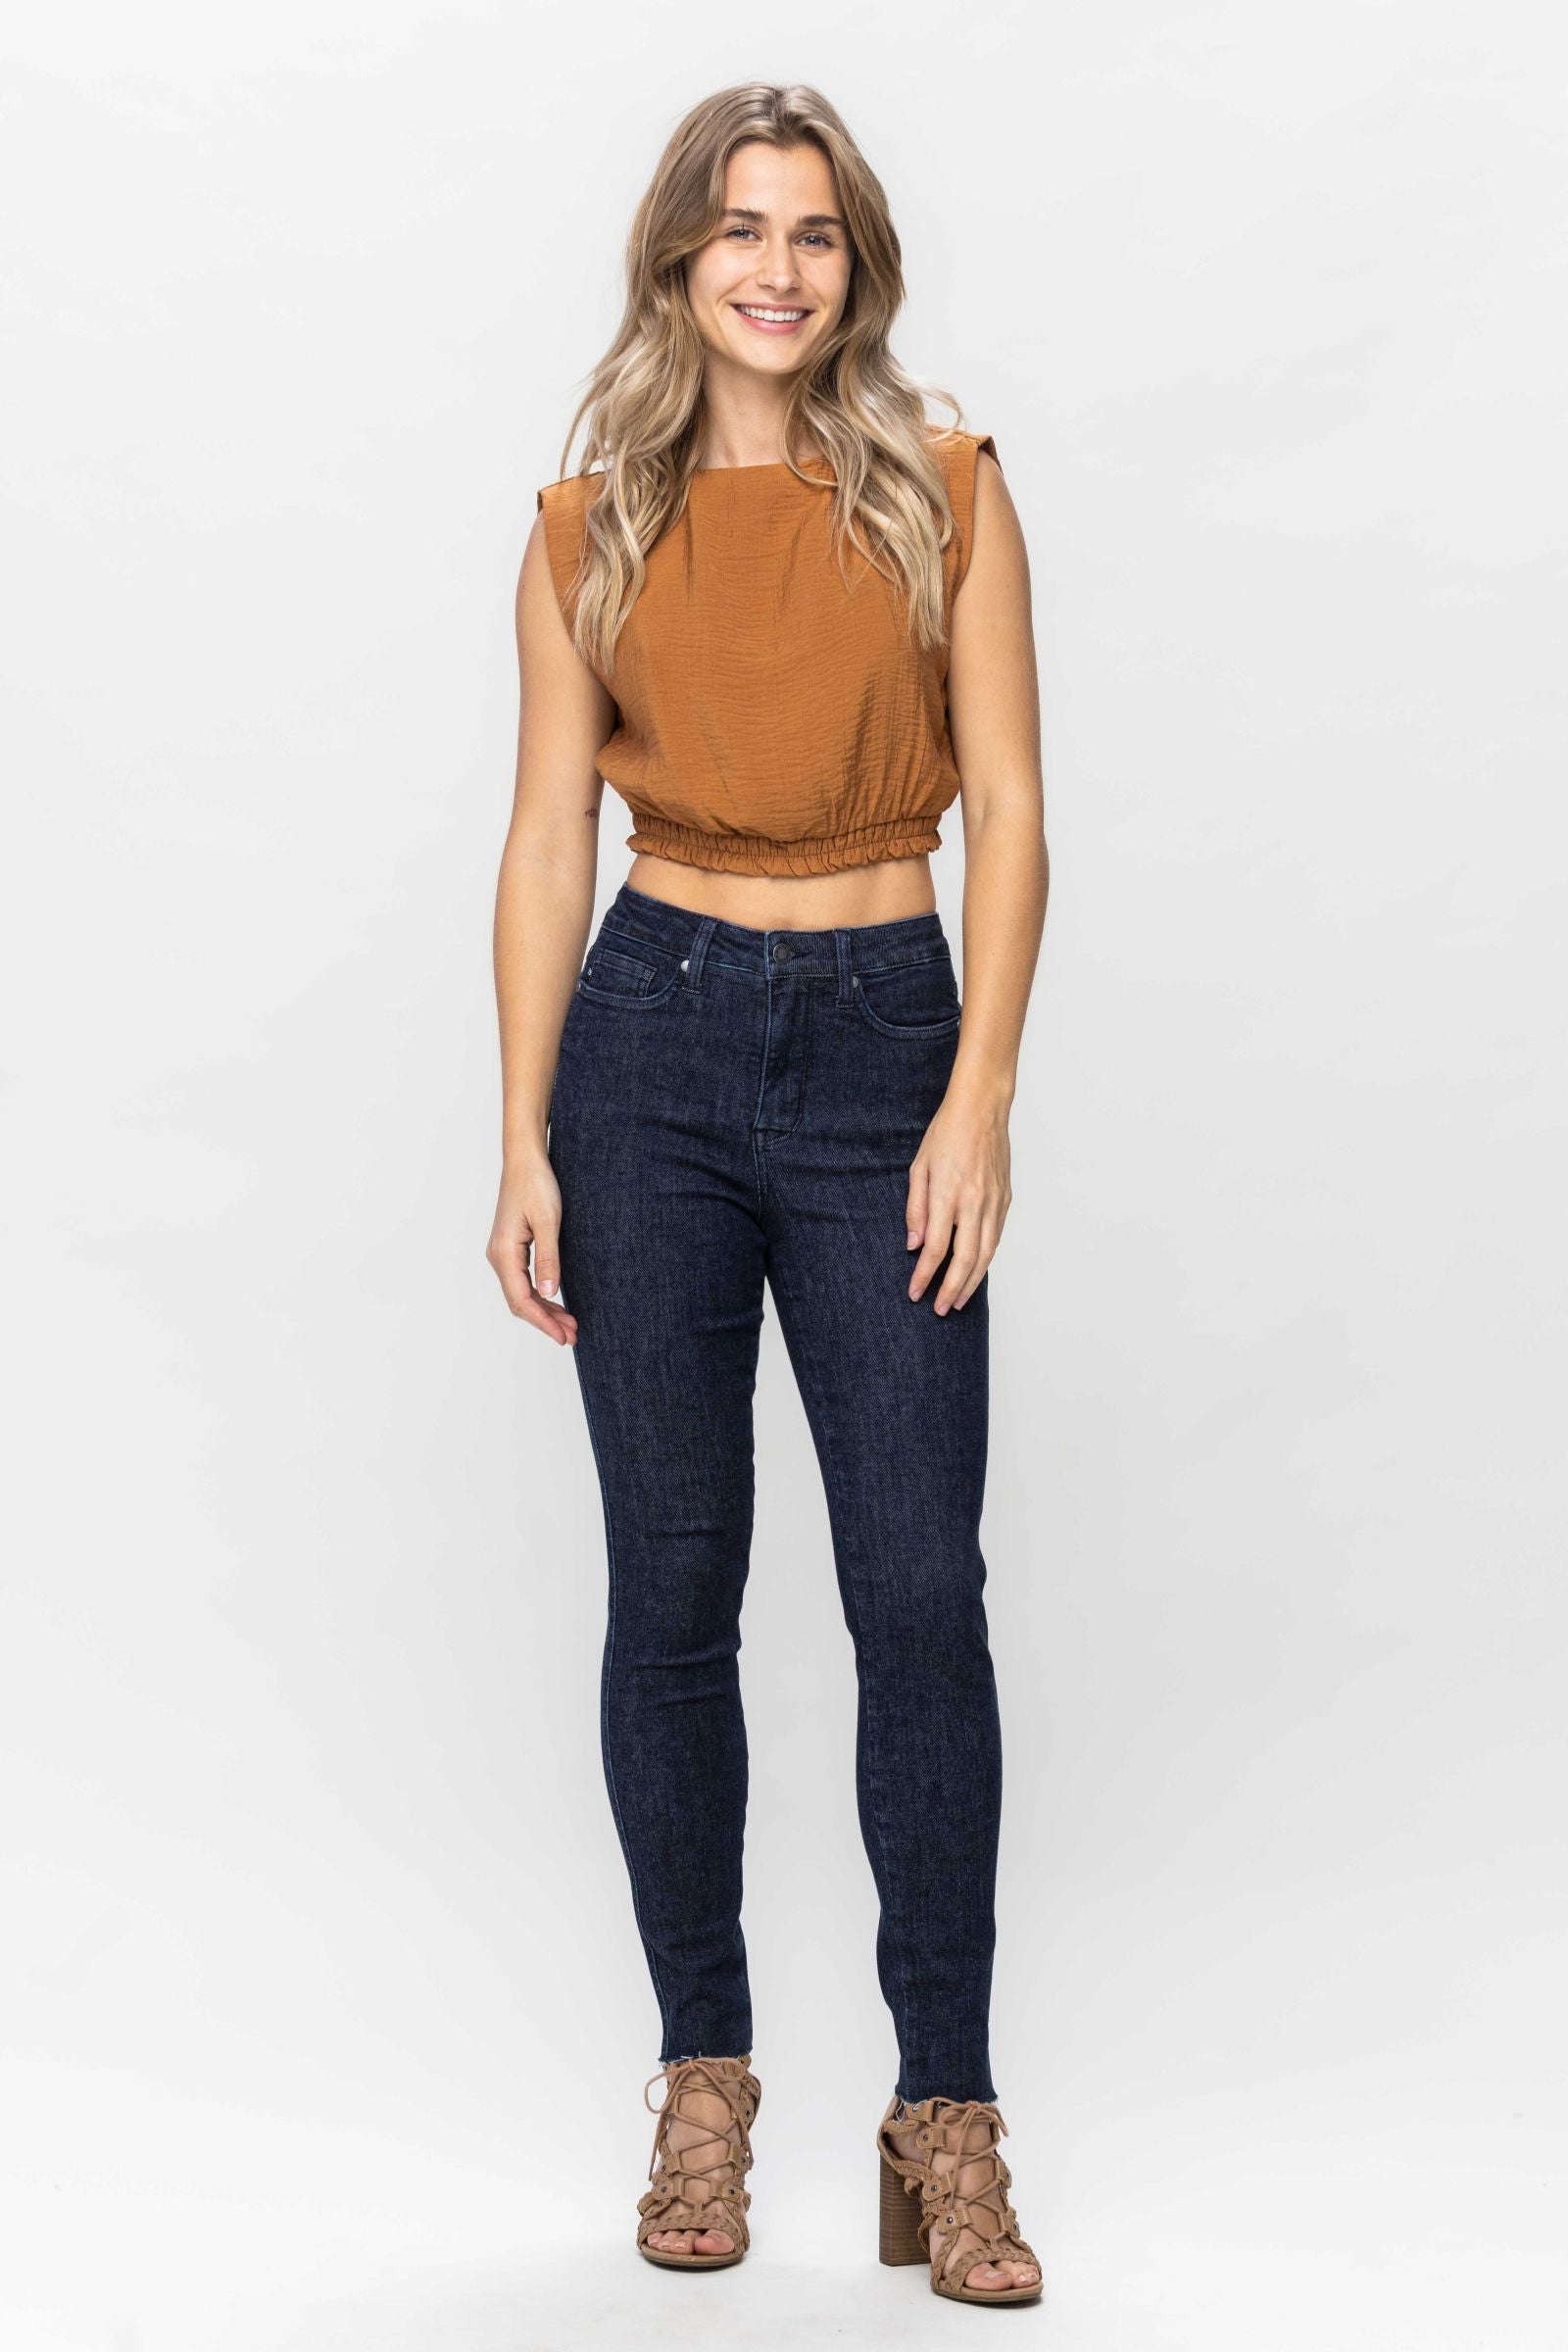 Cheers Judy Blue Tummy Control Jeans